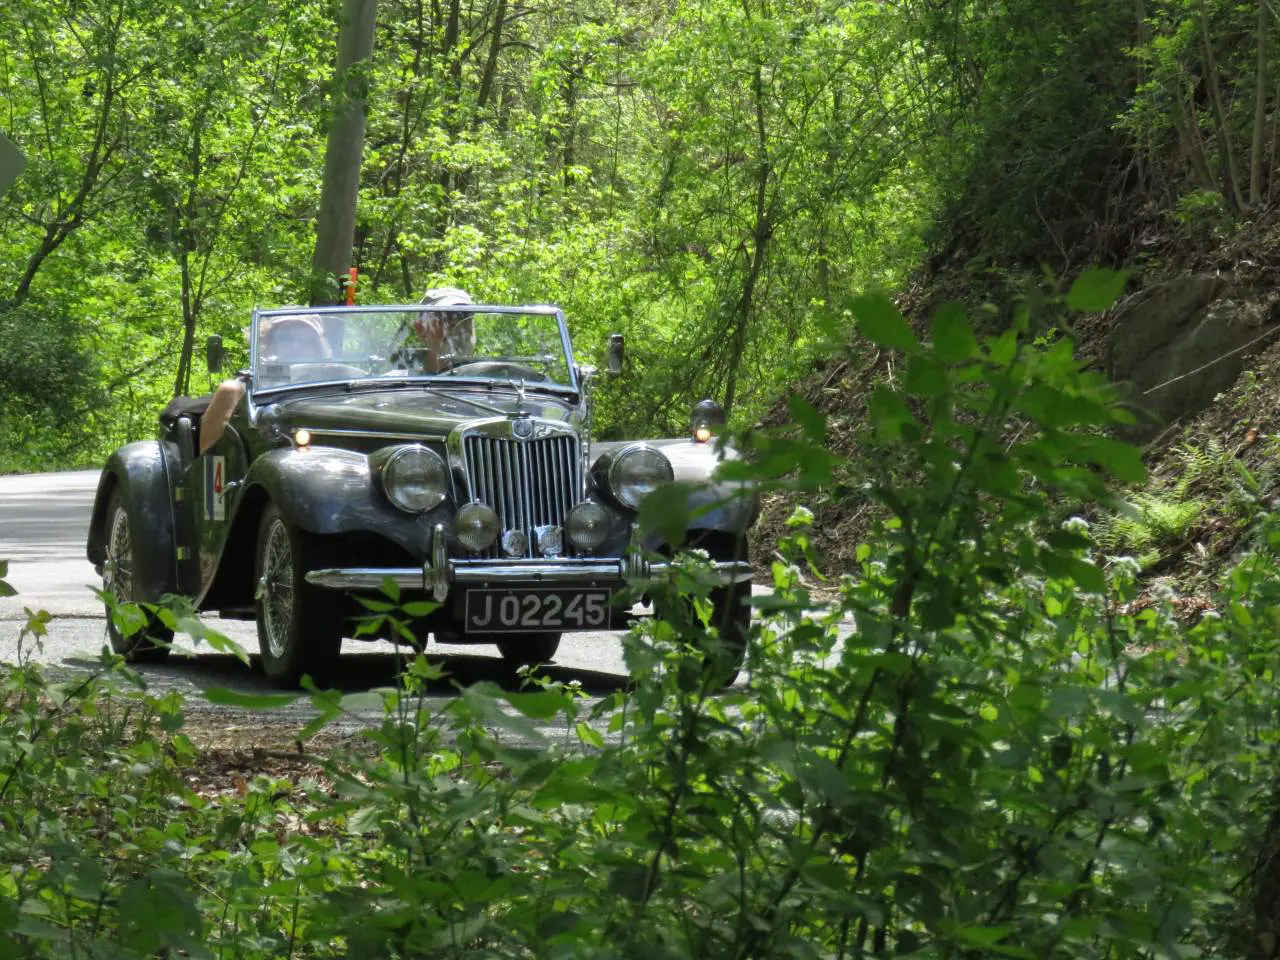 A vintage car is driving through the woods.